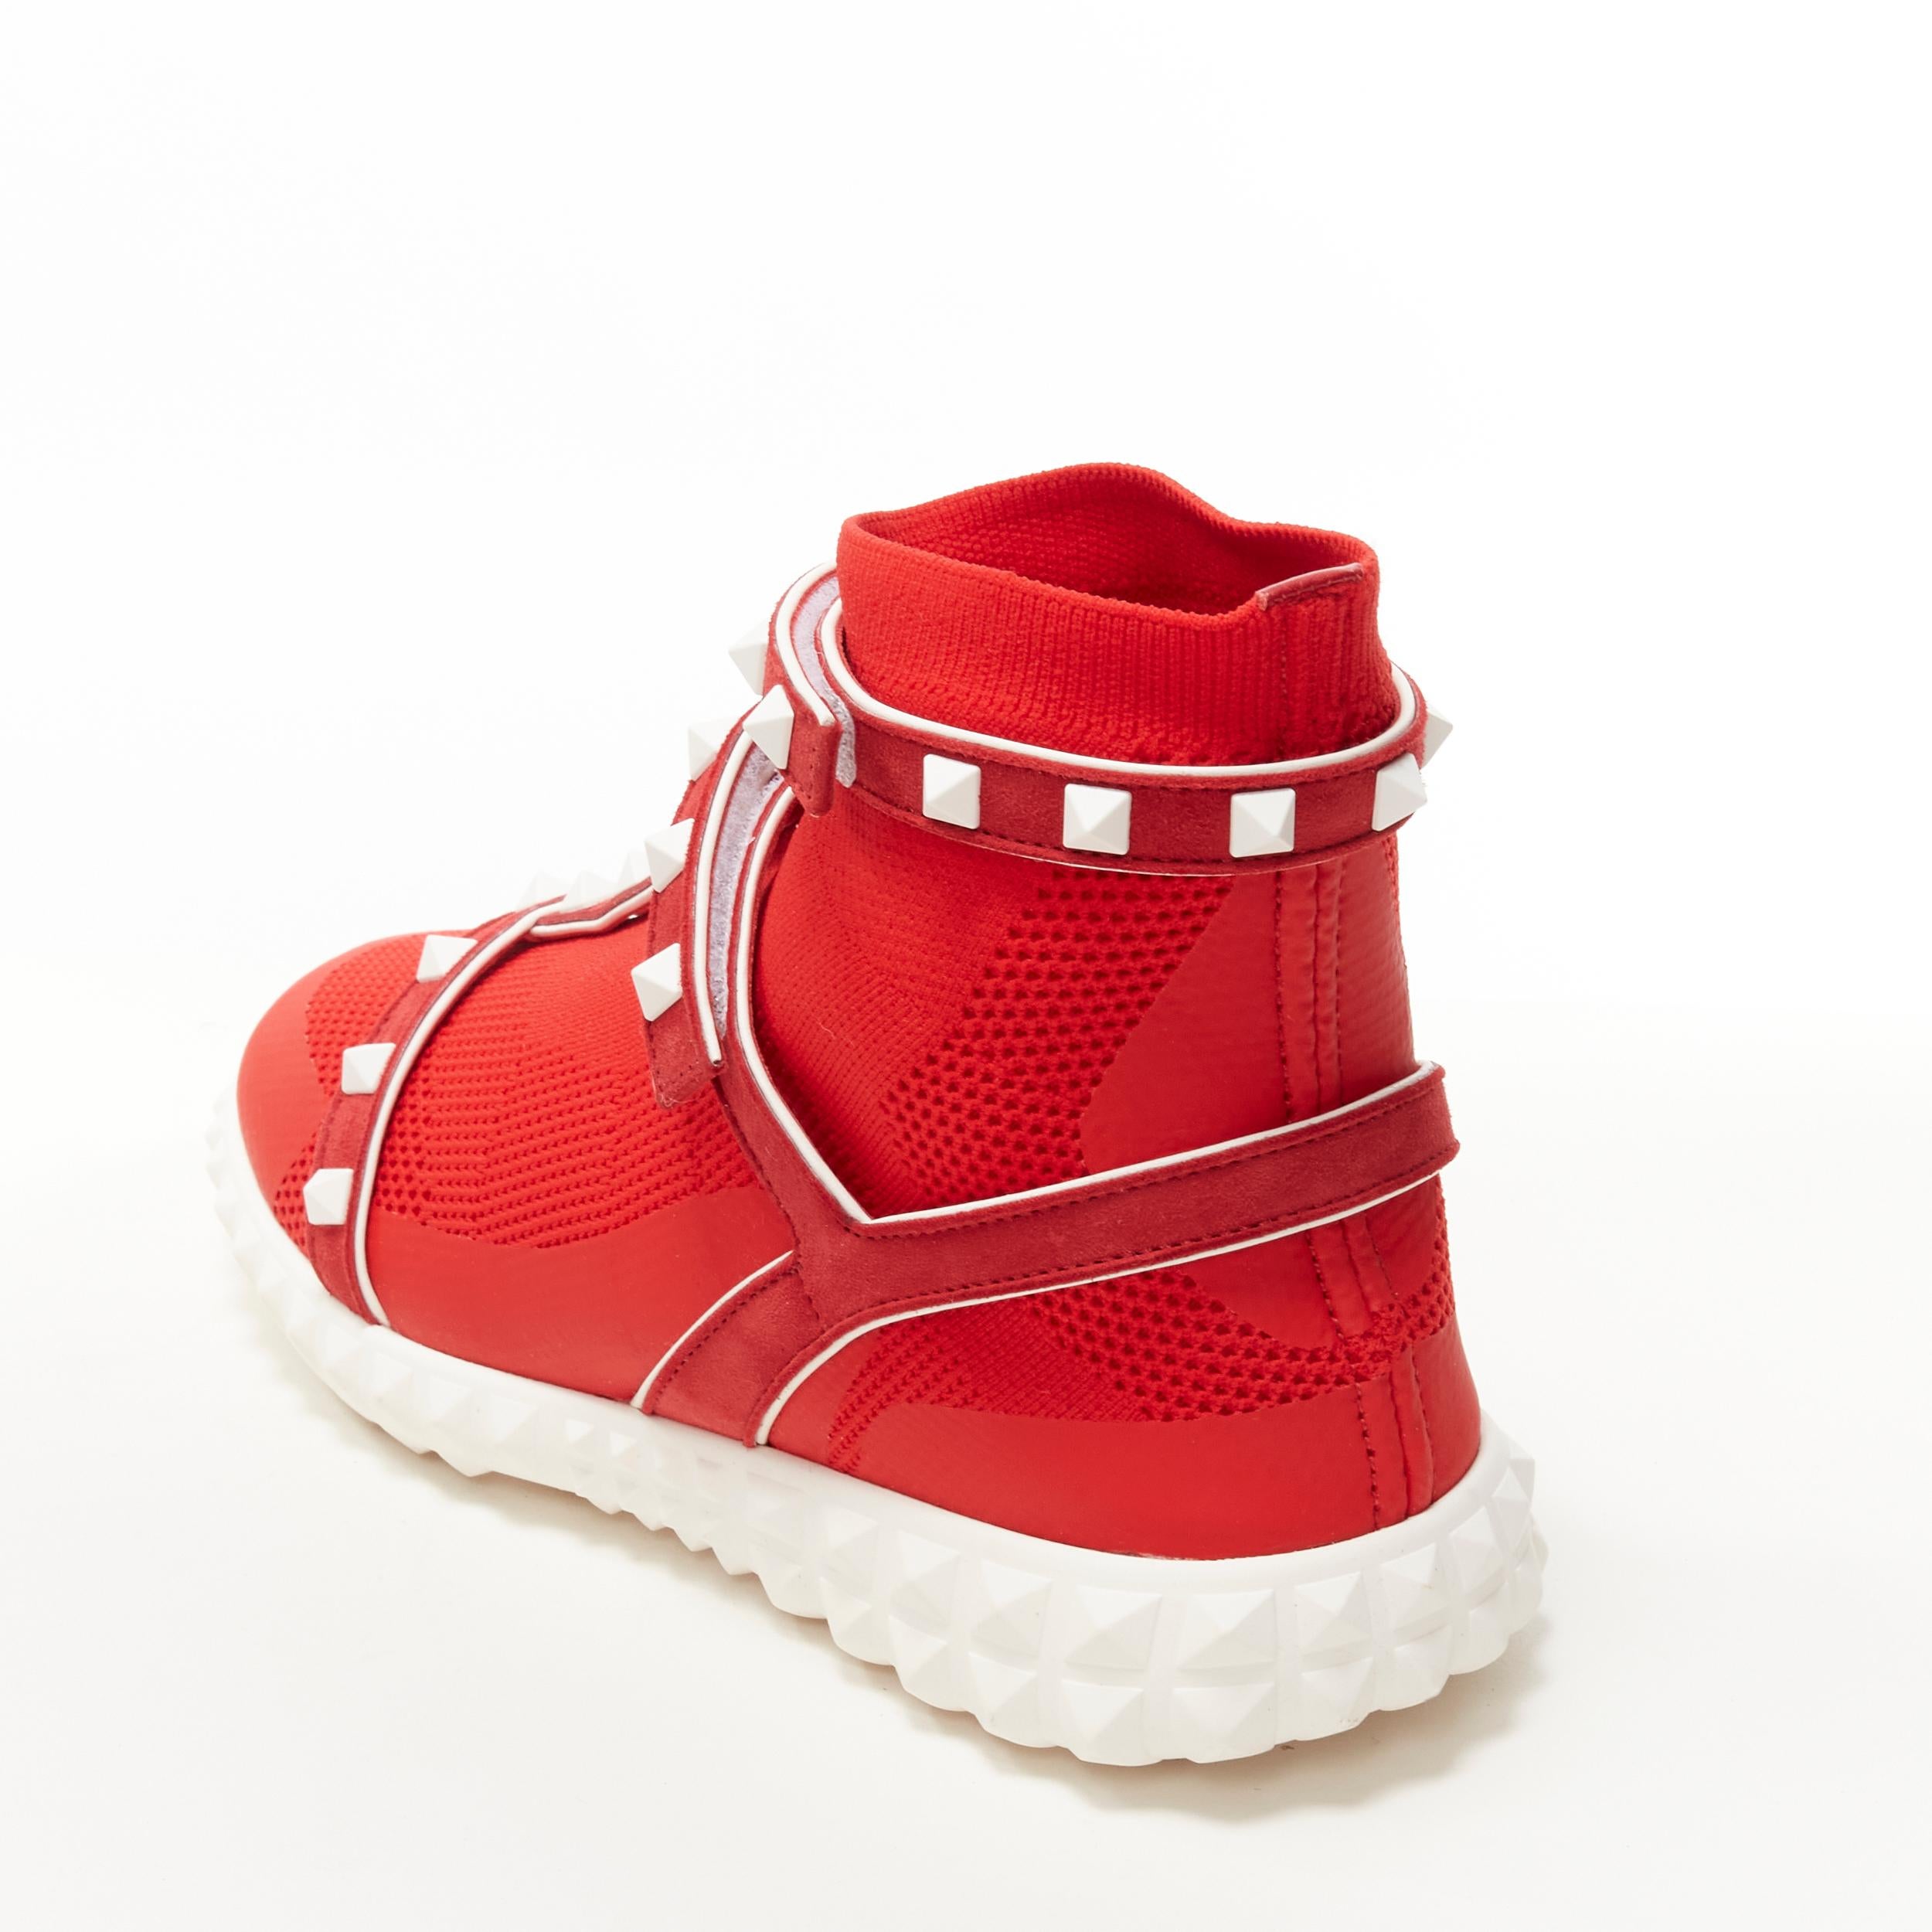 VALENTINO Free Rockstud Bodytech red sock knit white stud high top sneaker EU36 For Sale 3